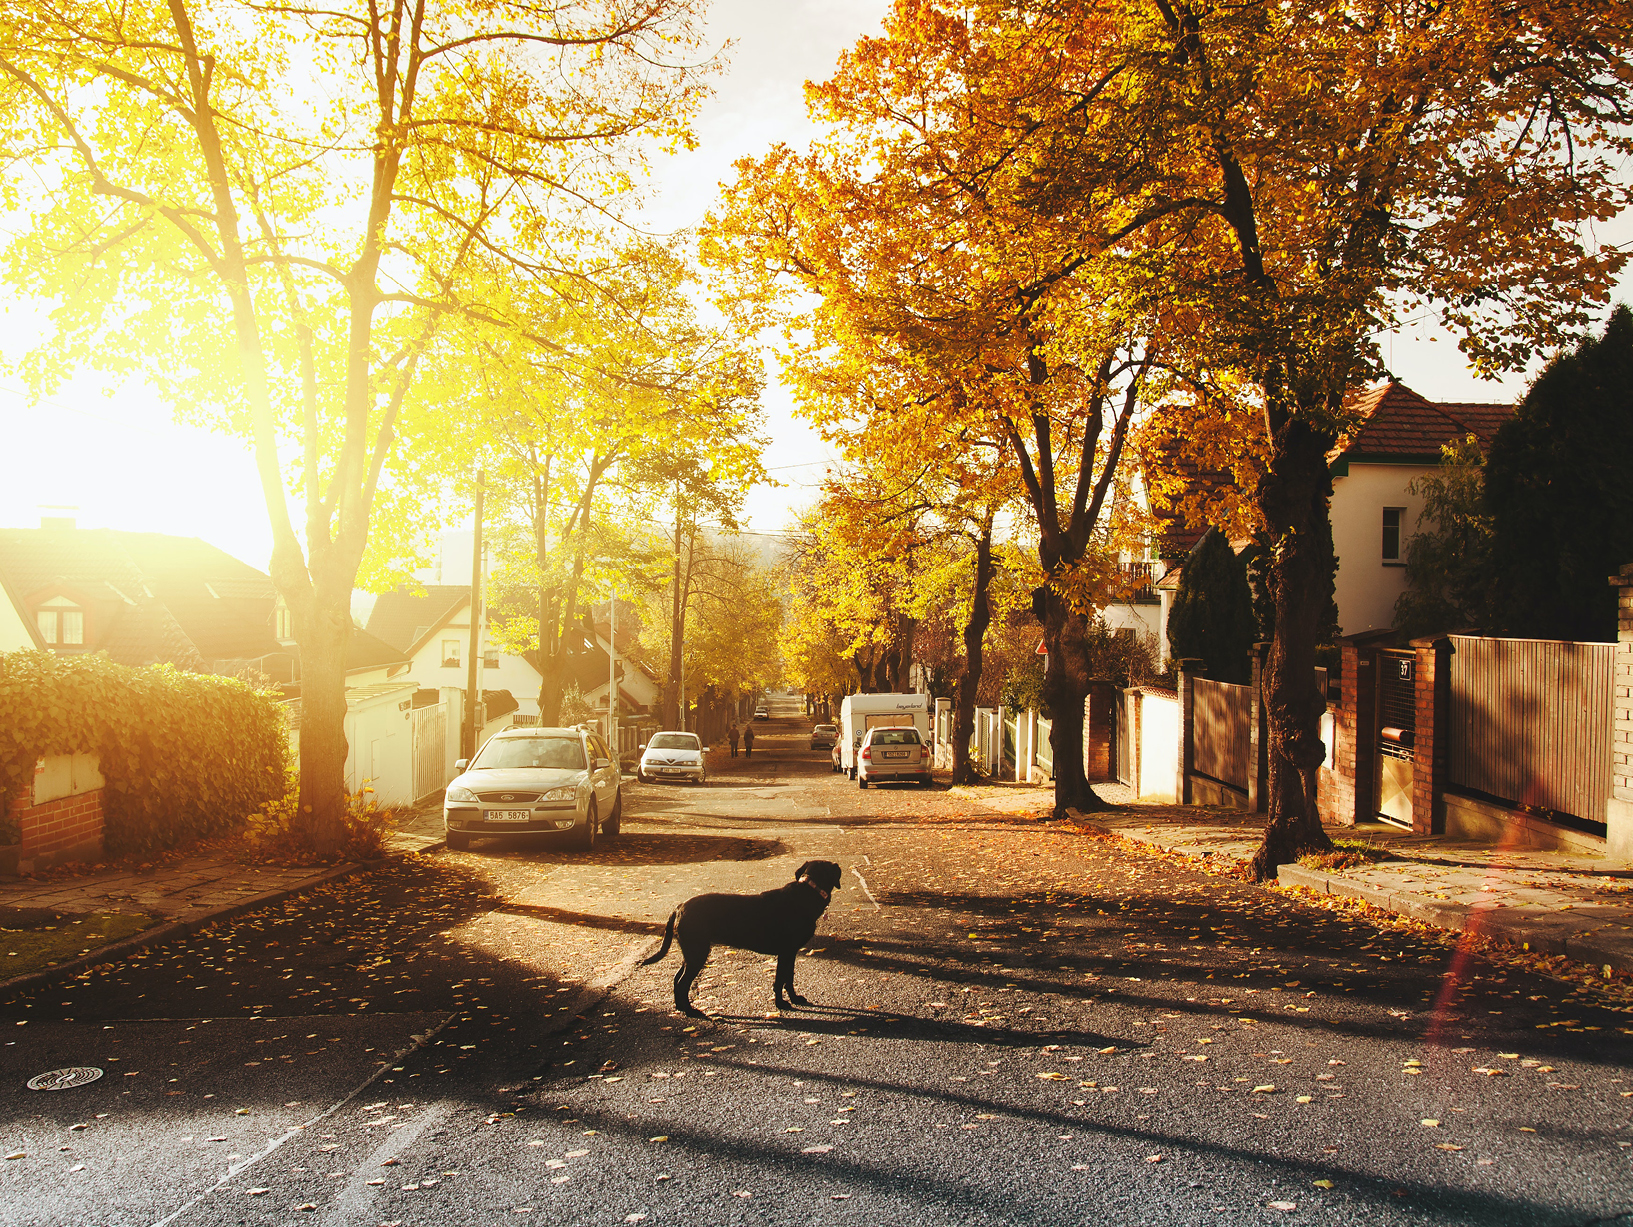 dog standing in street at sunset